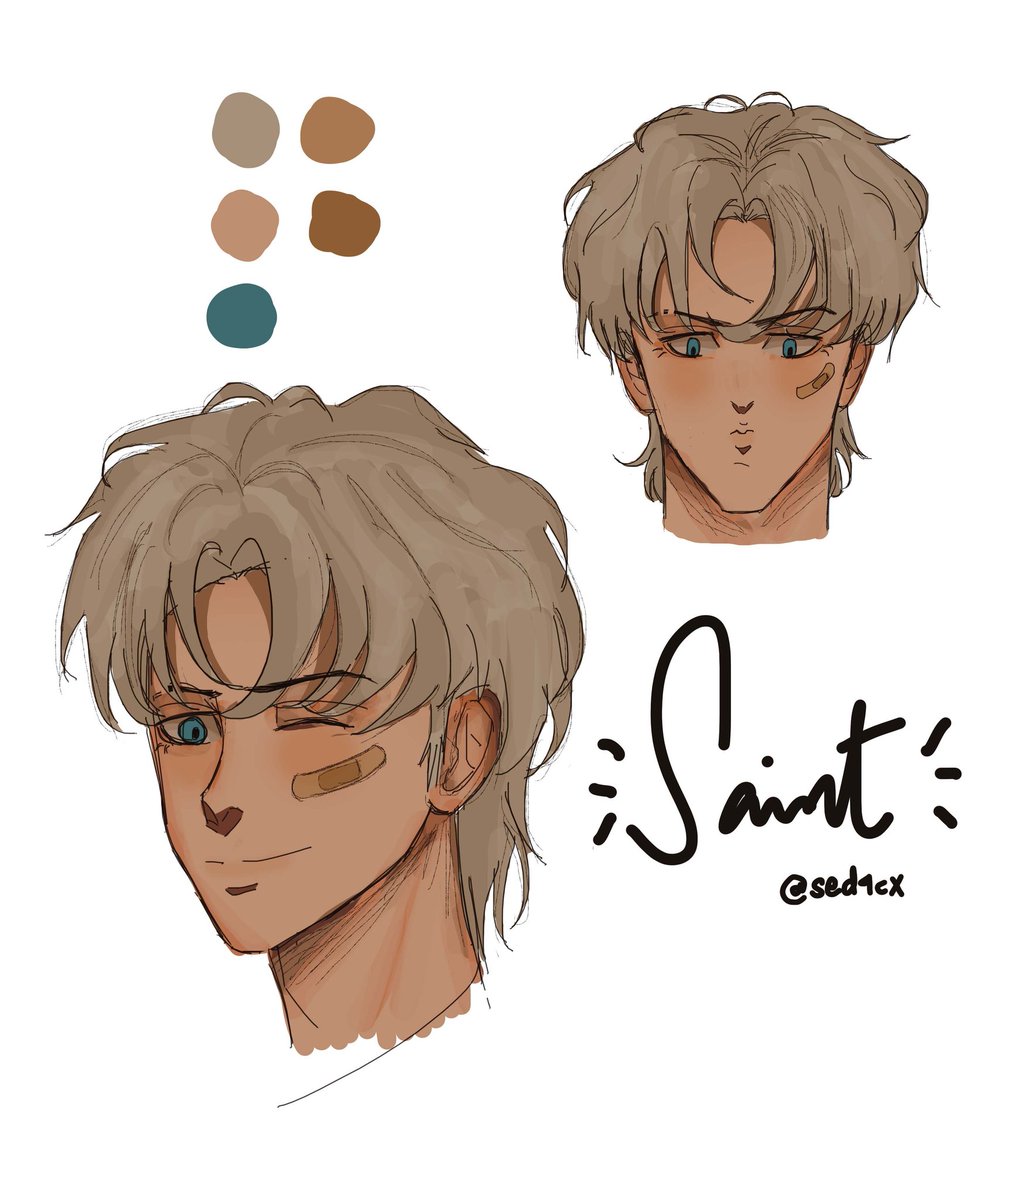 made a very quick head doodle of my new OC, Saint! I'll introduce him to you guys soon hehe

Oh! And he has a twin so I'll probably introduce them tgt :> 